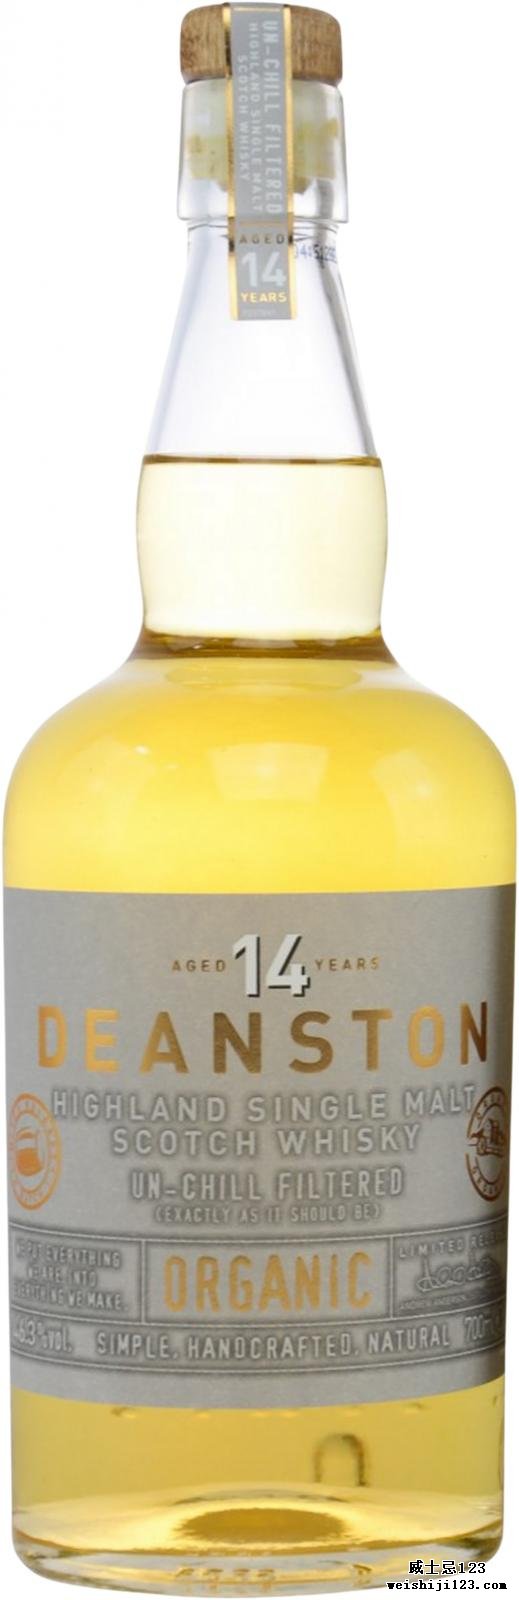 Deanston 14-year-old